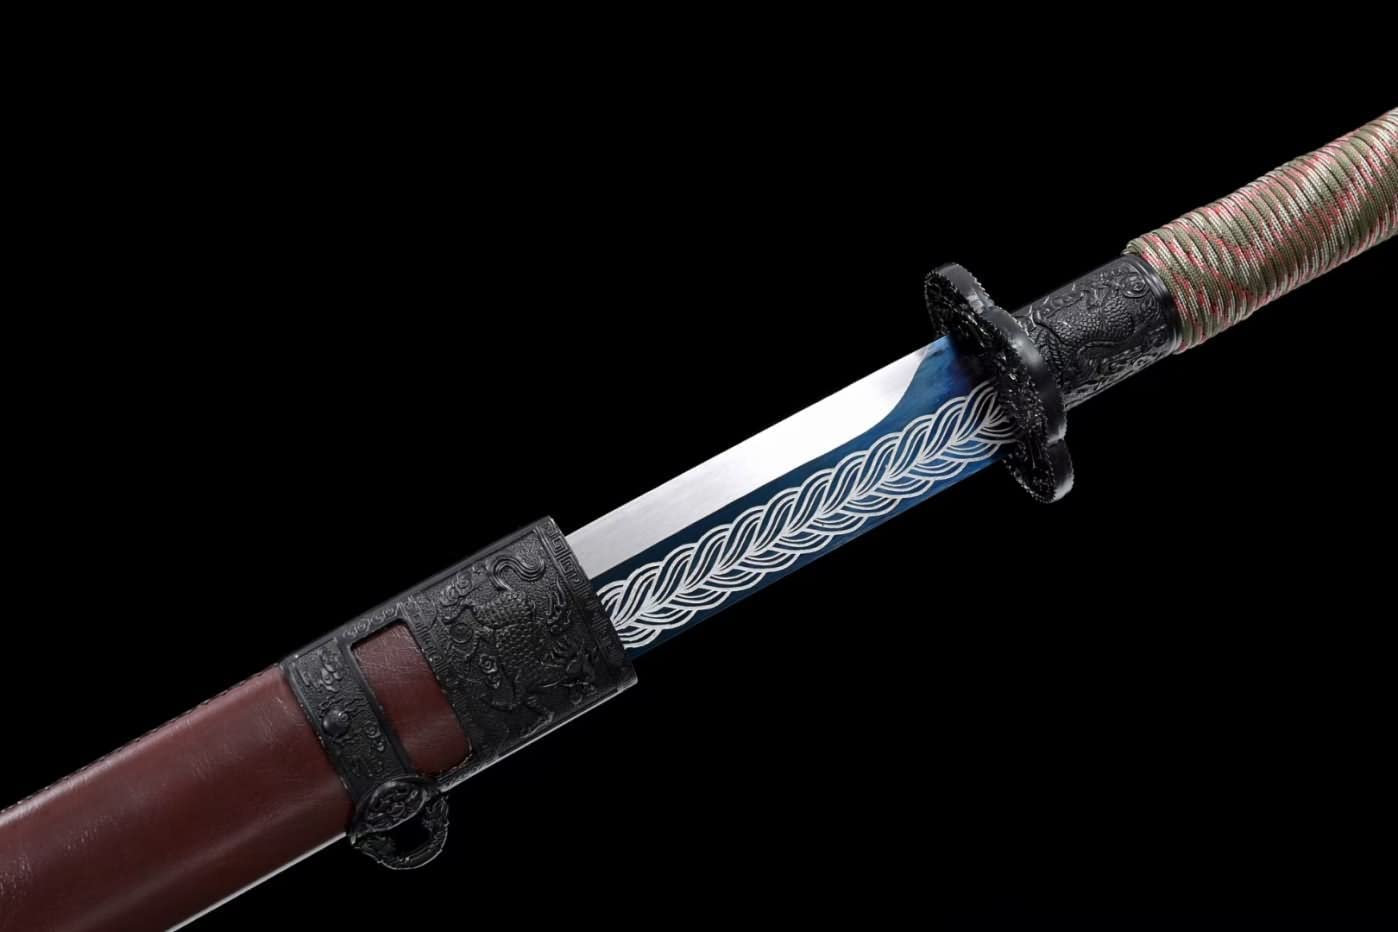 Broadsword Real,Forged High Carbon Steel Blade,Alloy Fittings,Solid Wood Scabbard,Chinese swords